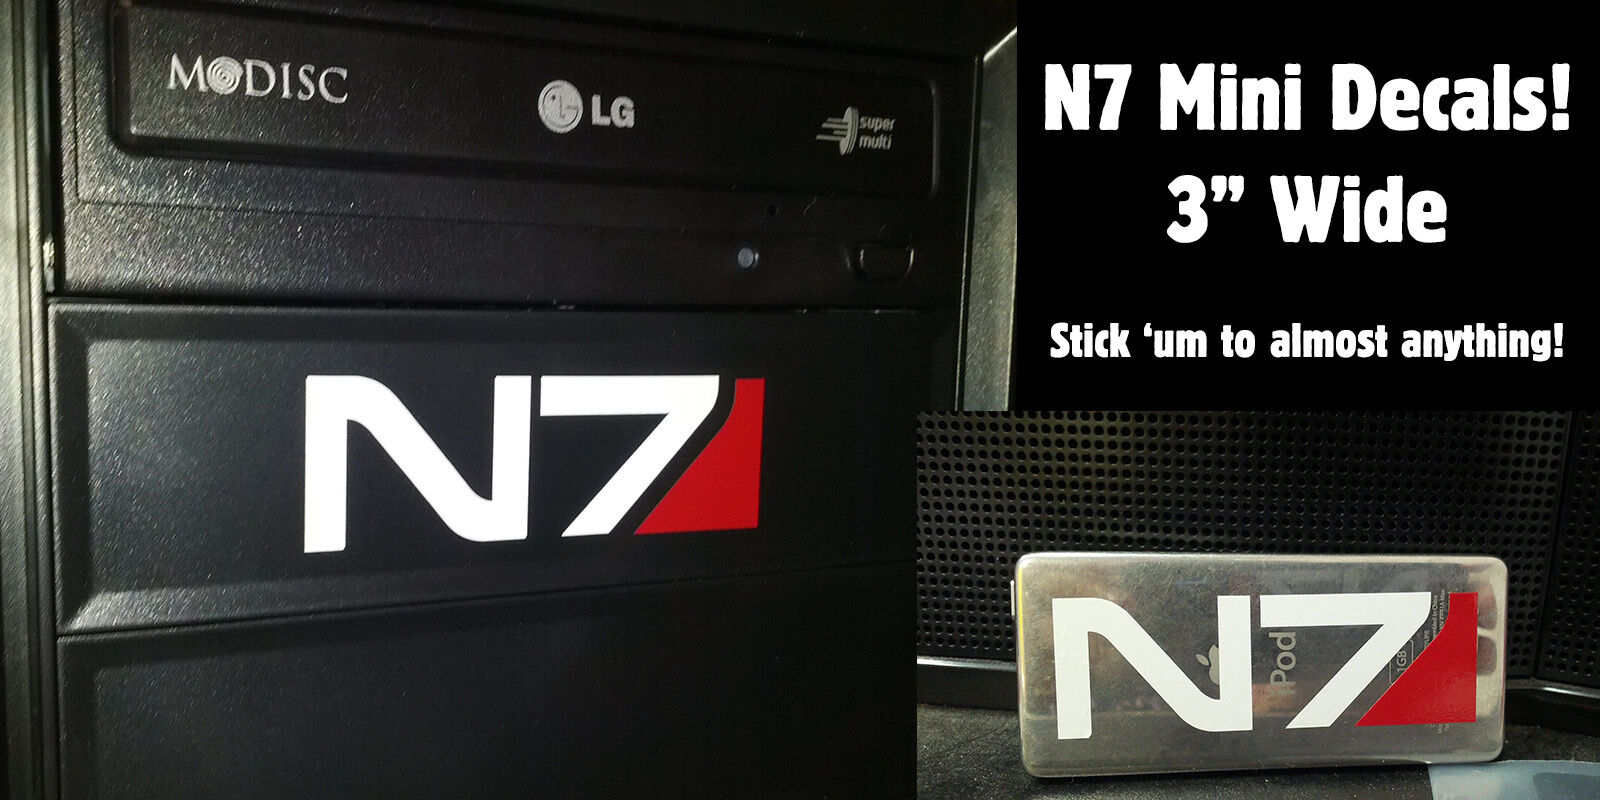 Mass Effect N7 Minis!  Decal Sticker for Window, Xbox 360 & more!